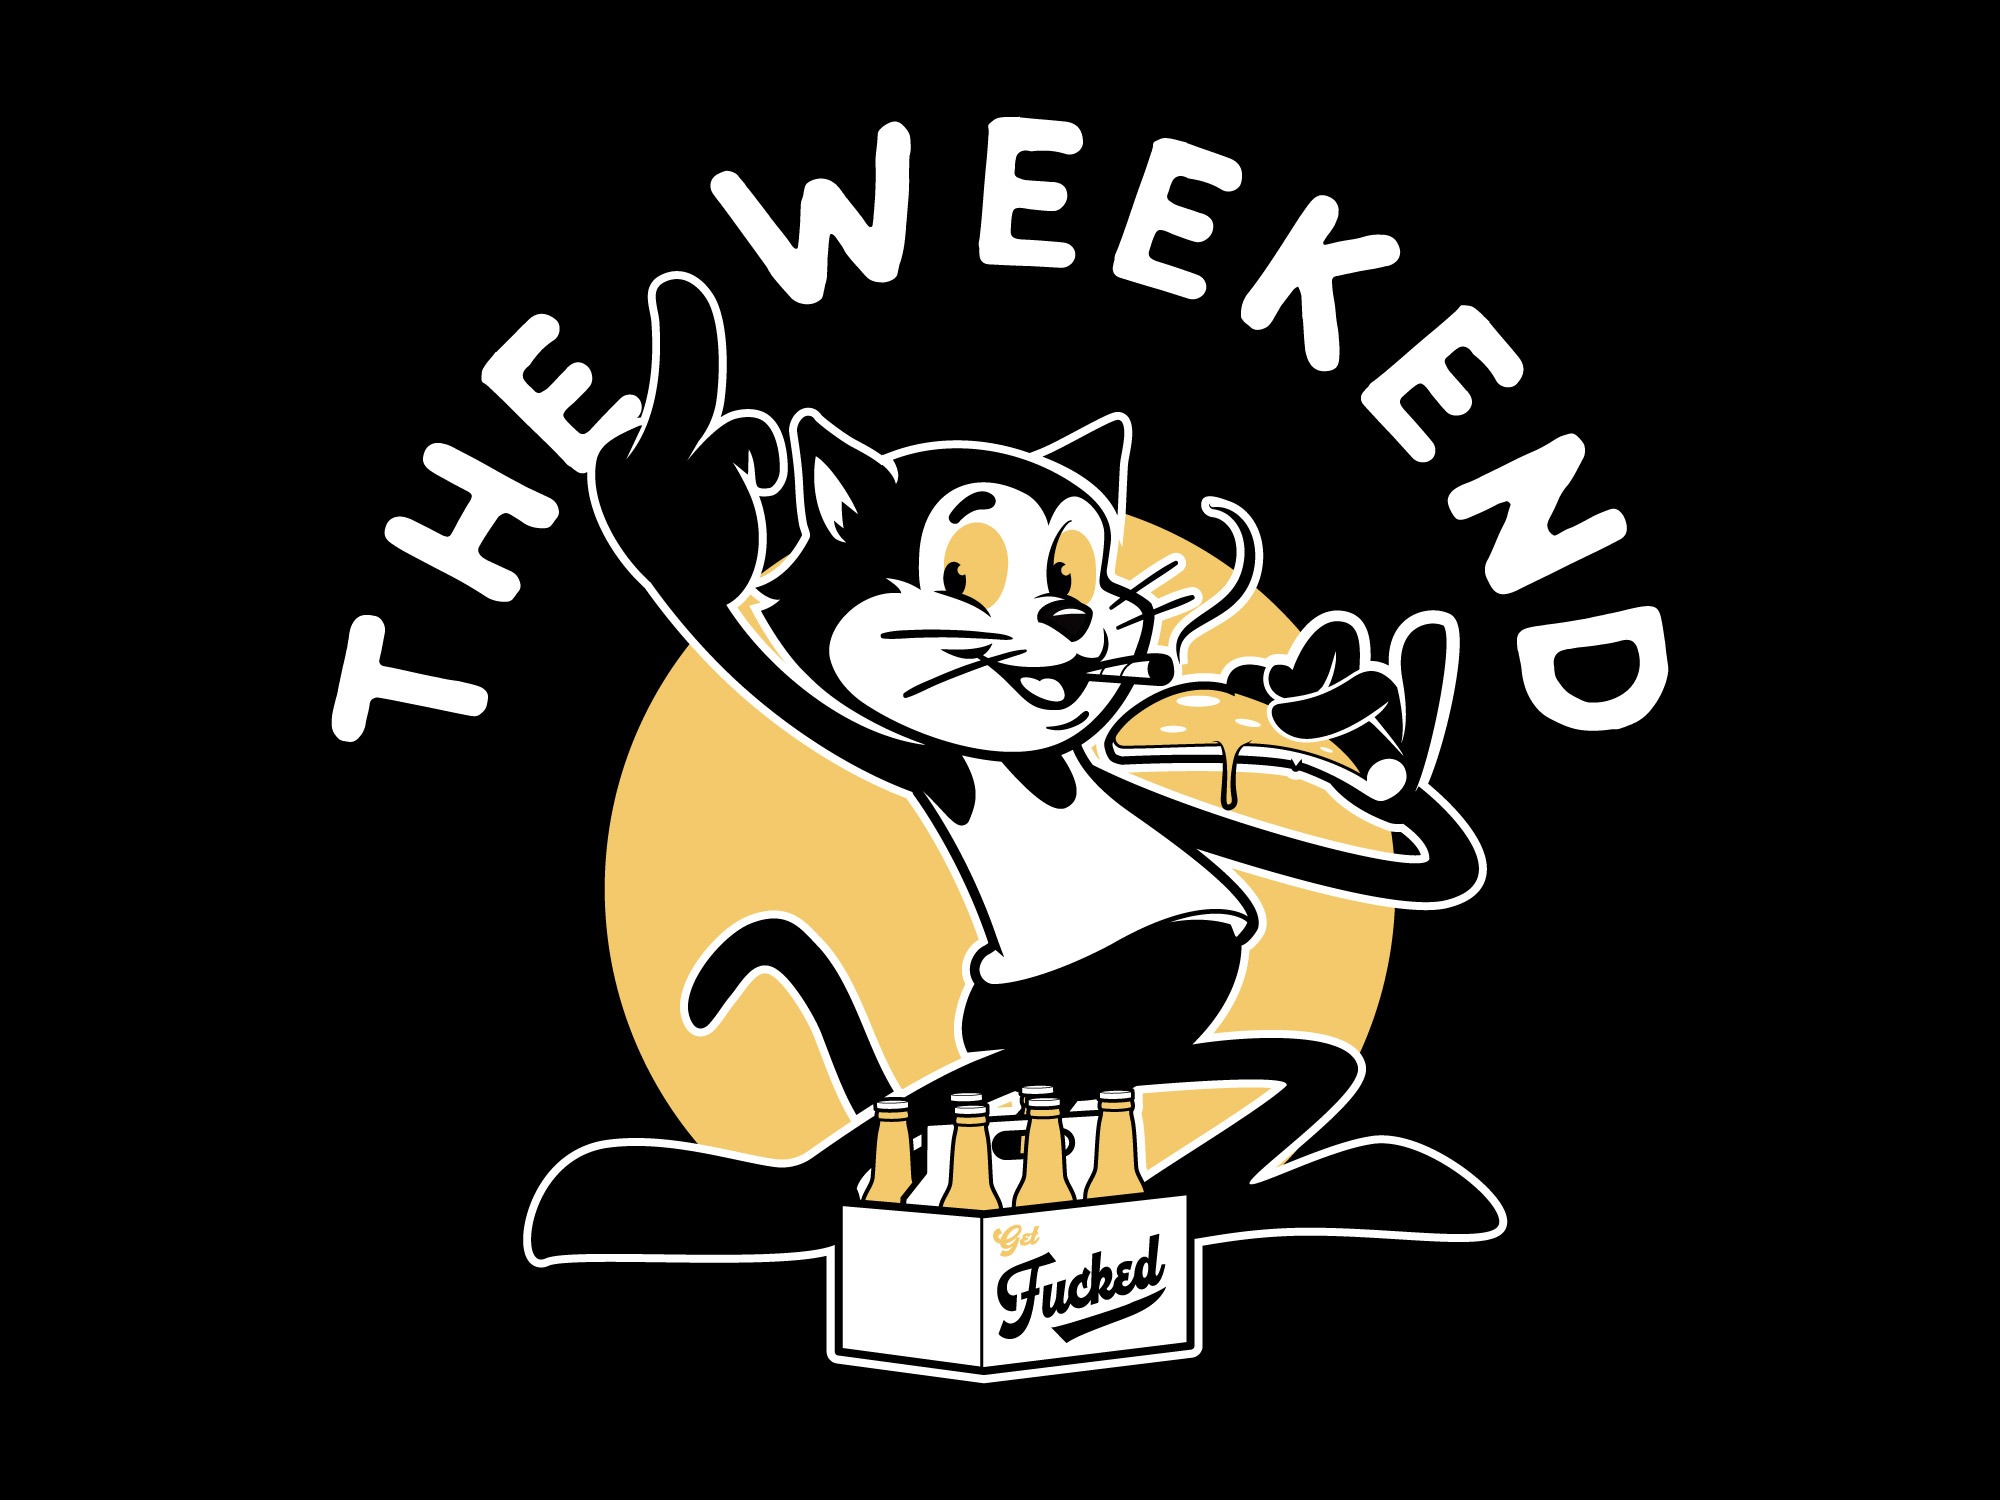 The weekend Cat